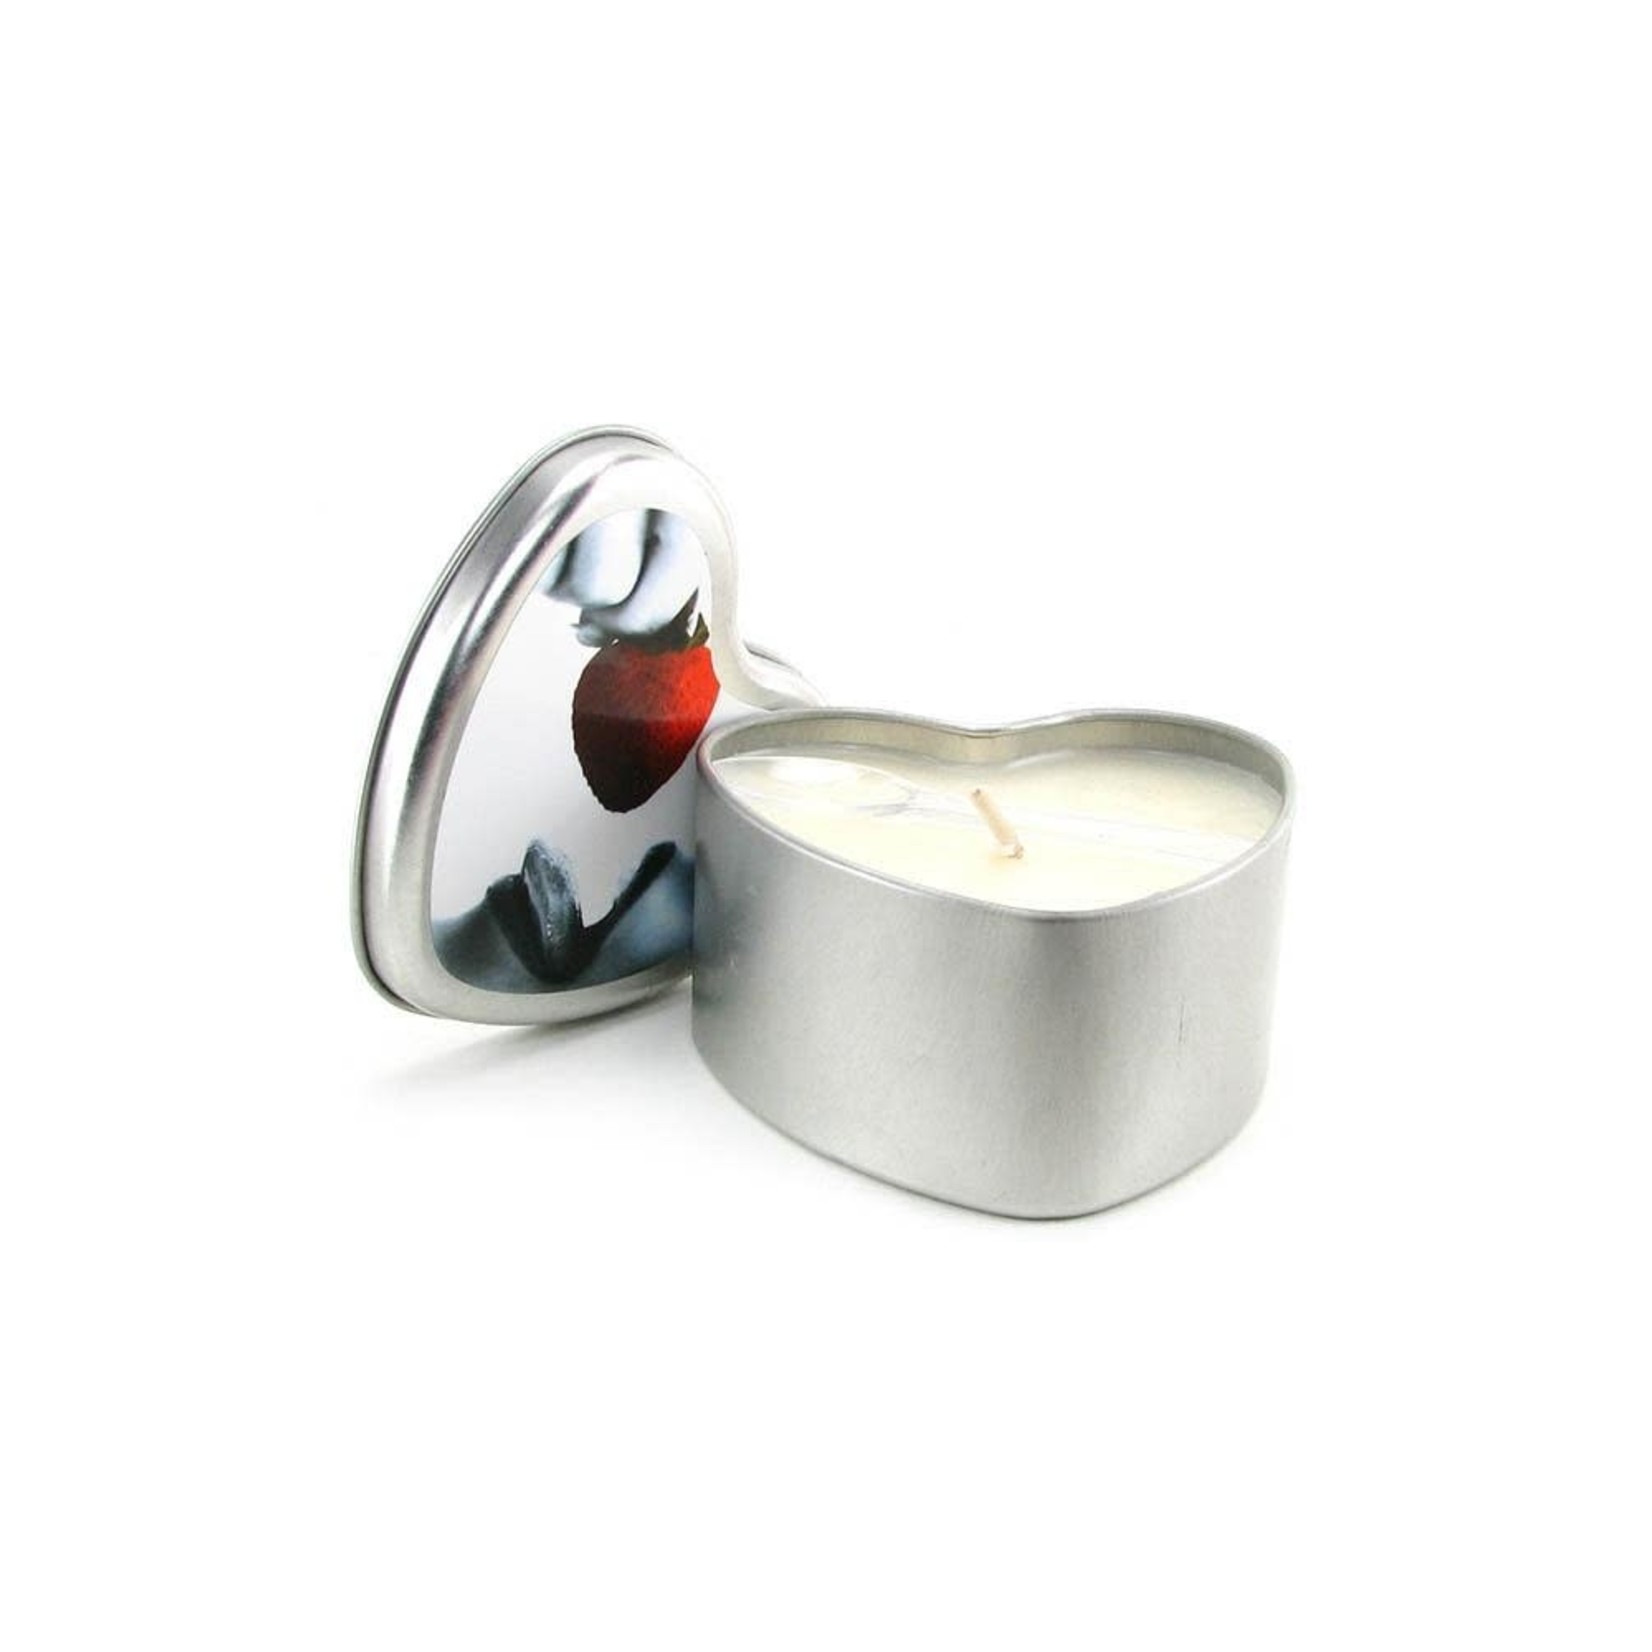 EARTHLY BODY EARTHLY BODIES - EDIBLE MASSAGE CANDLE - STRAWBERRY